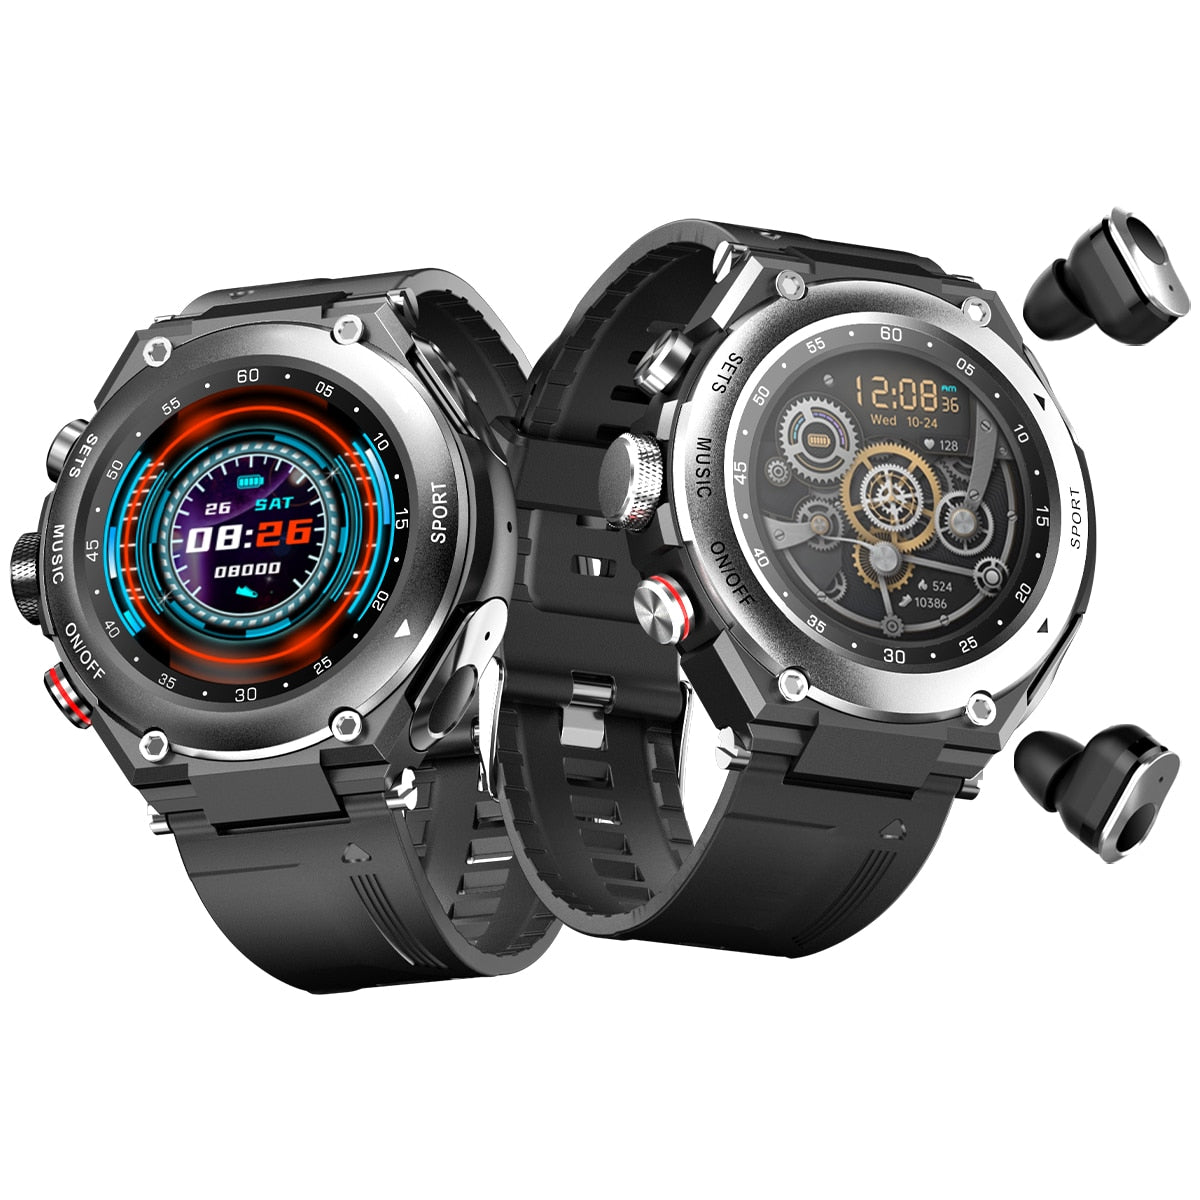 Smart Watch with TWS Earphones, Bluetooth Call, Waterproof, Heart Rate, and Blood Pressure Monitoring